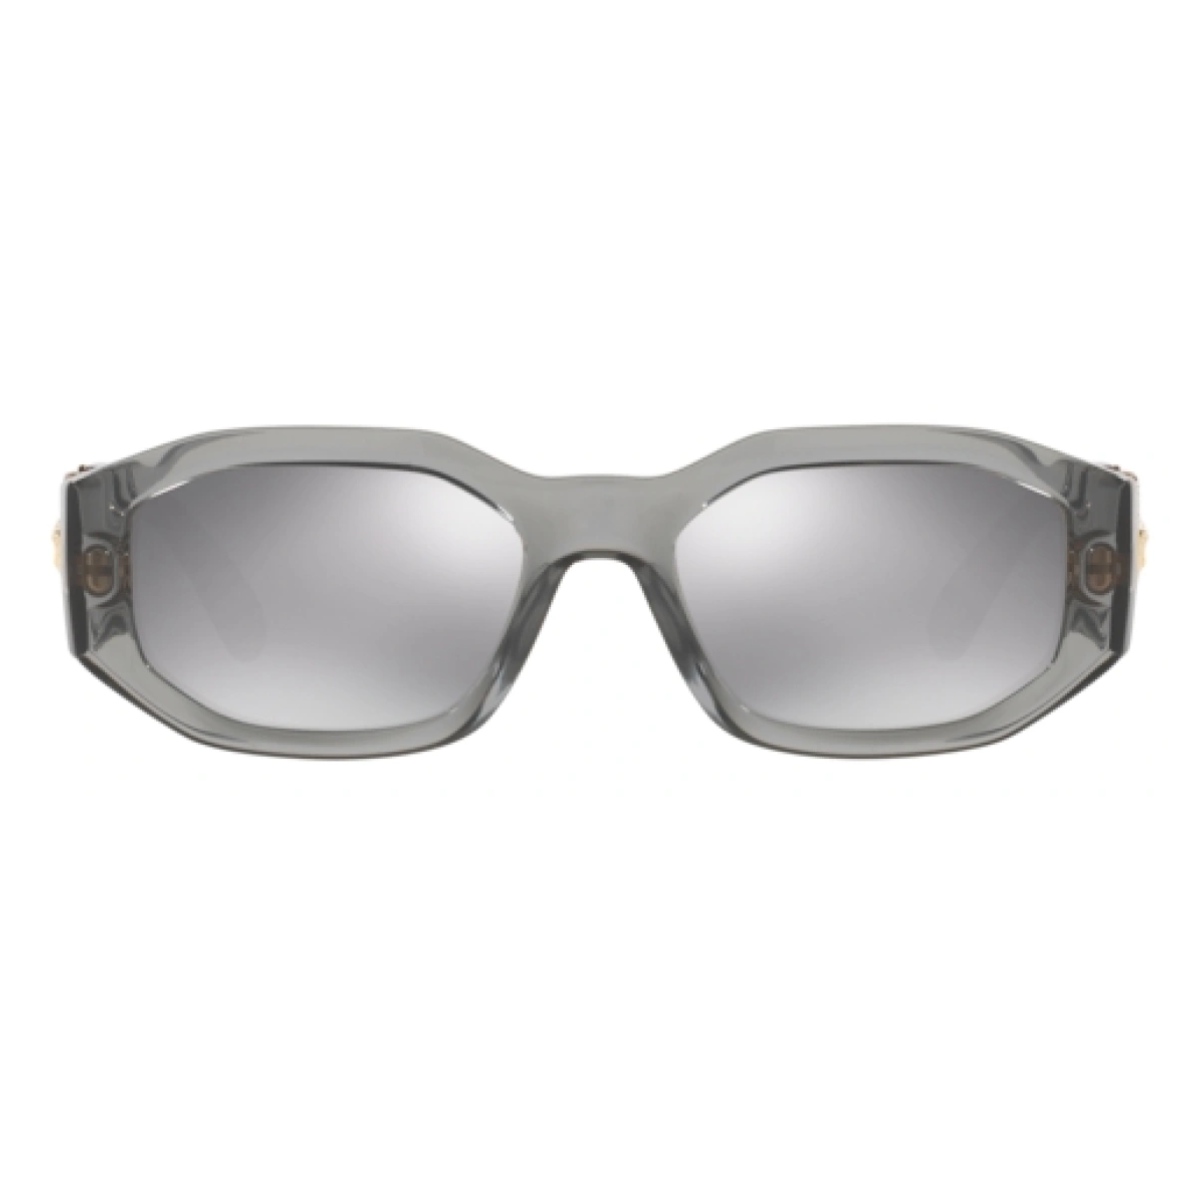 "Stylish Versace 4361 311/6G Square Sunglasses for Men and Women at Optorium. Light grey mirror lenses, non-polarized, high-quality materials. at optorium"